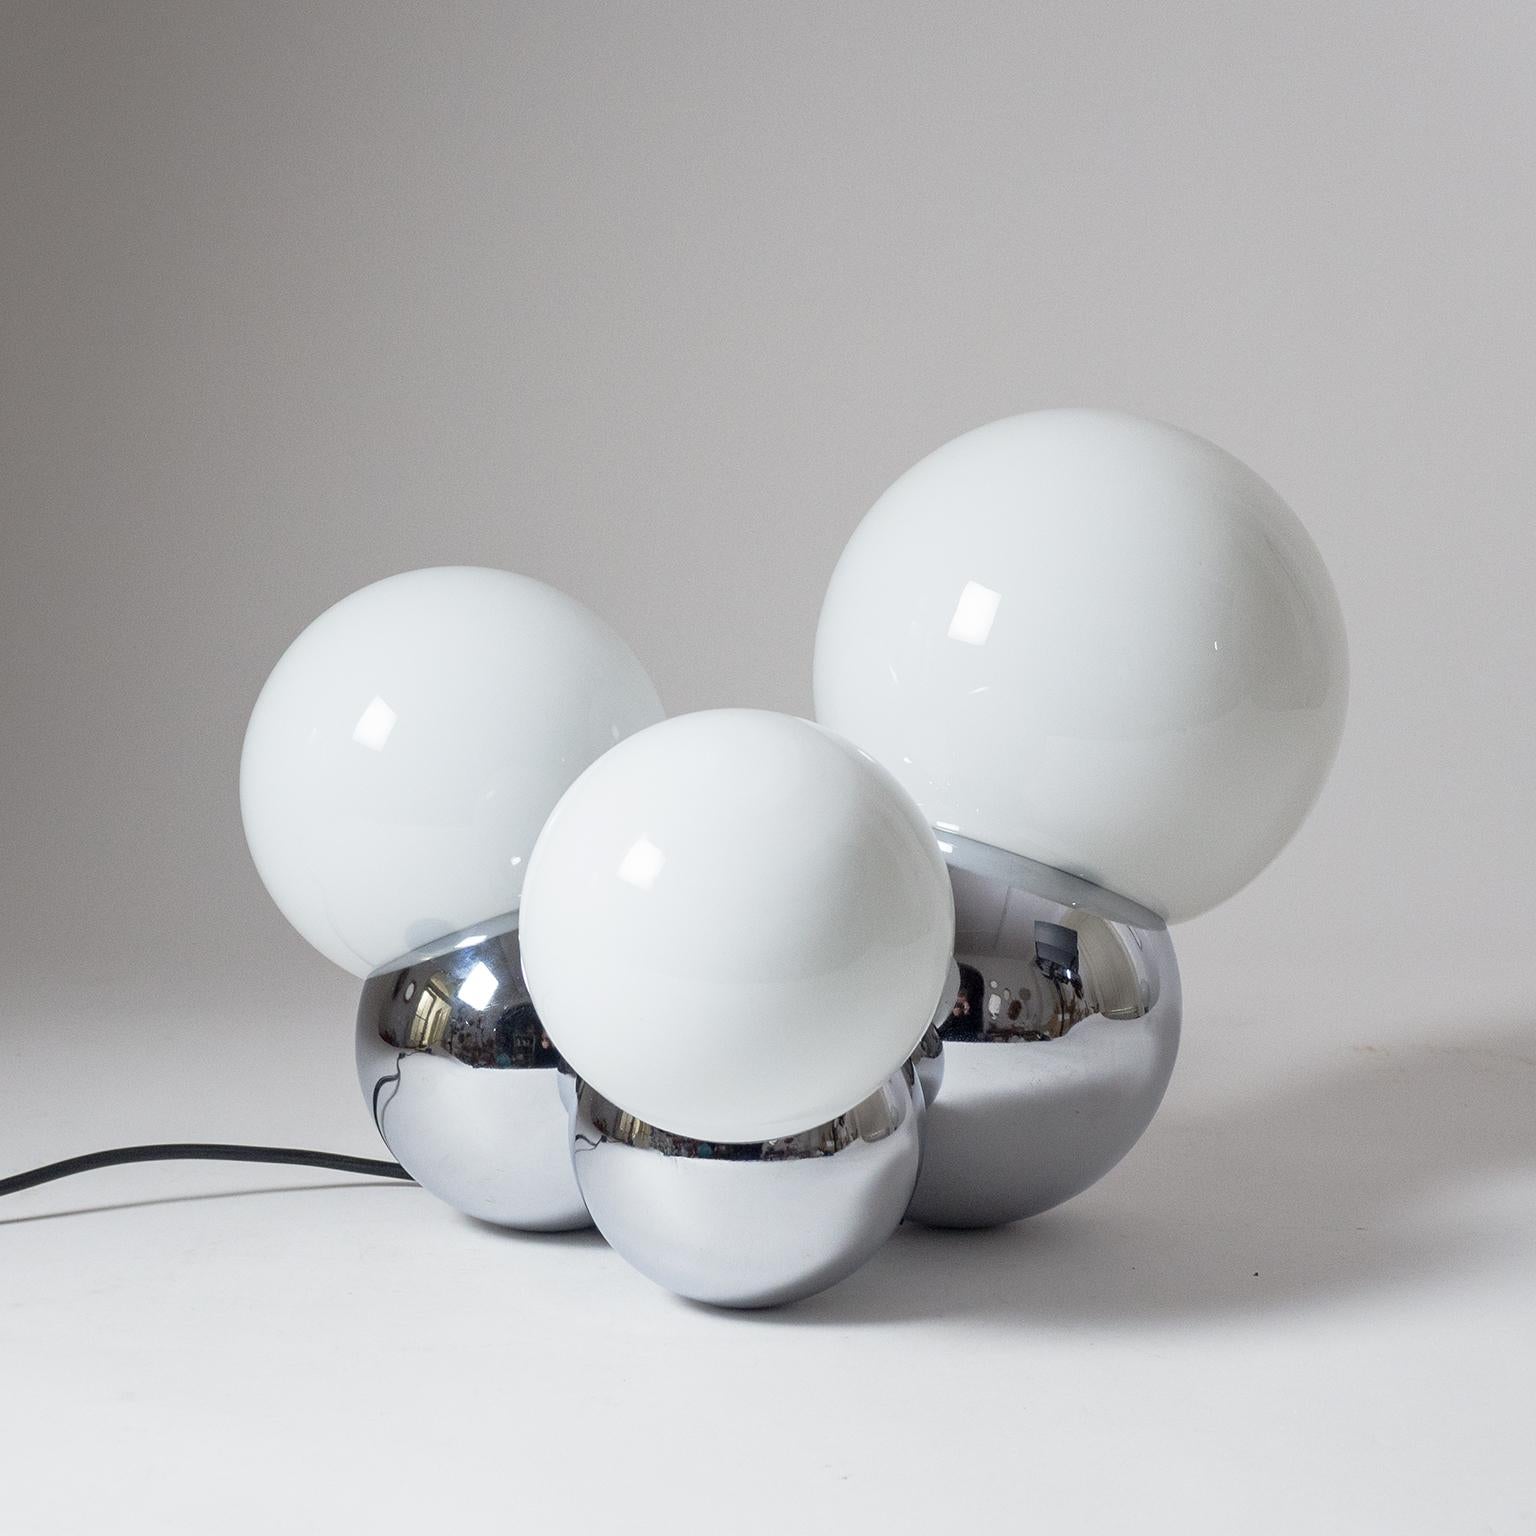 Stylish Italian Space Age table lamp with three chrome globes in varying sizes along with three blown opaline glass globes in corresponding dimensions attributed to Reggiani, 1960s. The lamp comes with an original multifunctional chord-switch which